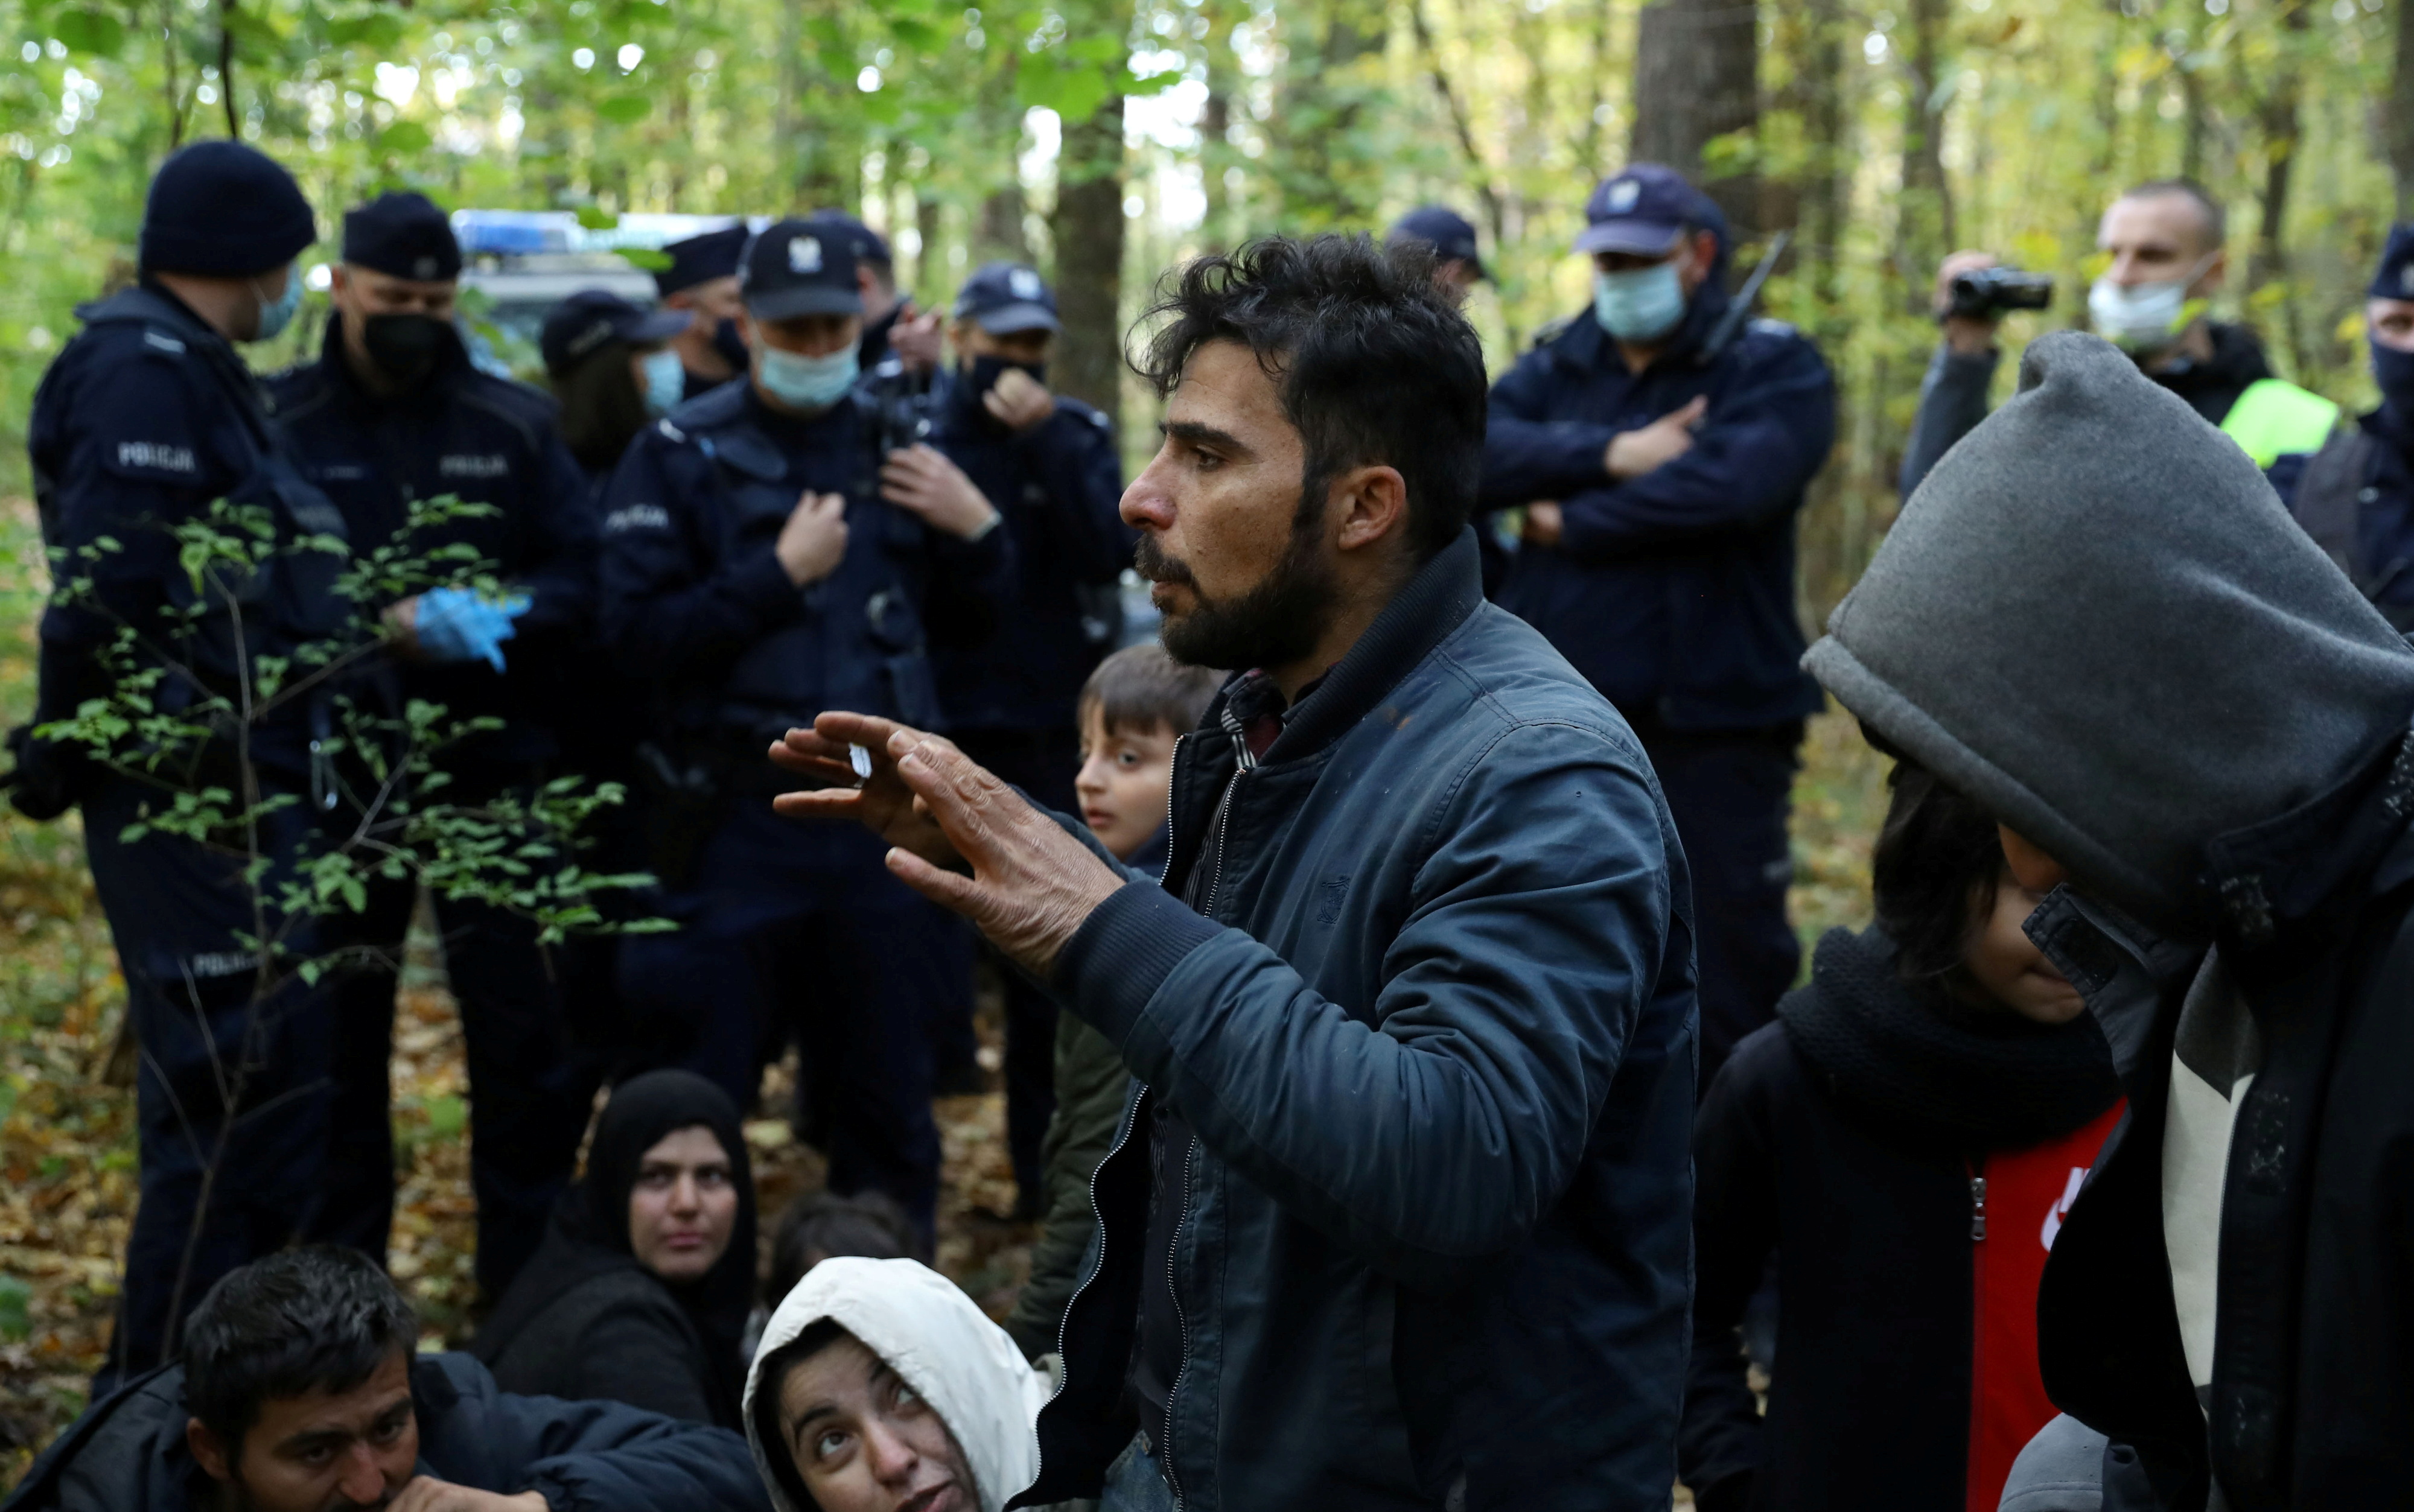 Iraqi migrants talk to NGO Grupa Granica's representatives as they are surrounded by border guards and police officers after they crossed the Belarusian-Polish border during the ongoing migrant crisis, in Hajnowka, Poland October 14, 2021. REUTERS/Kacper Pempel/File Photo